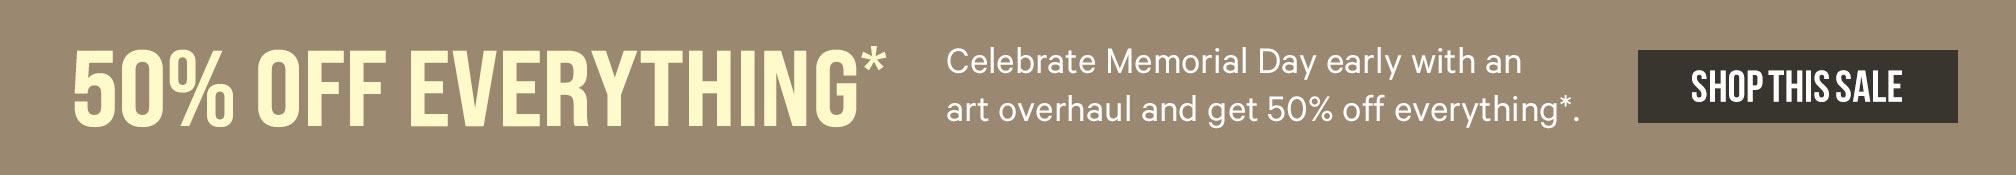 50% Off Everything* Celebrate Memorial Day early with an art overhaul and get 50% off everything*. Shop This Sale. >